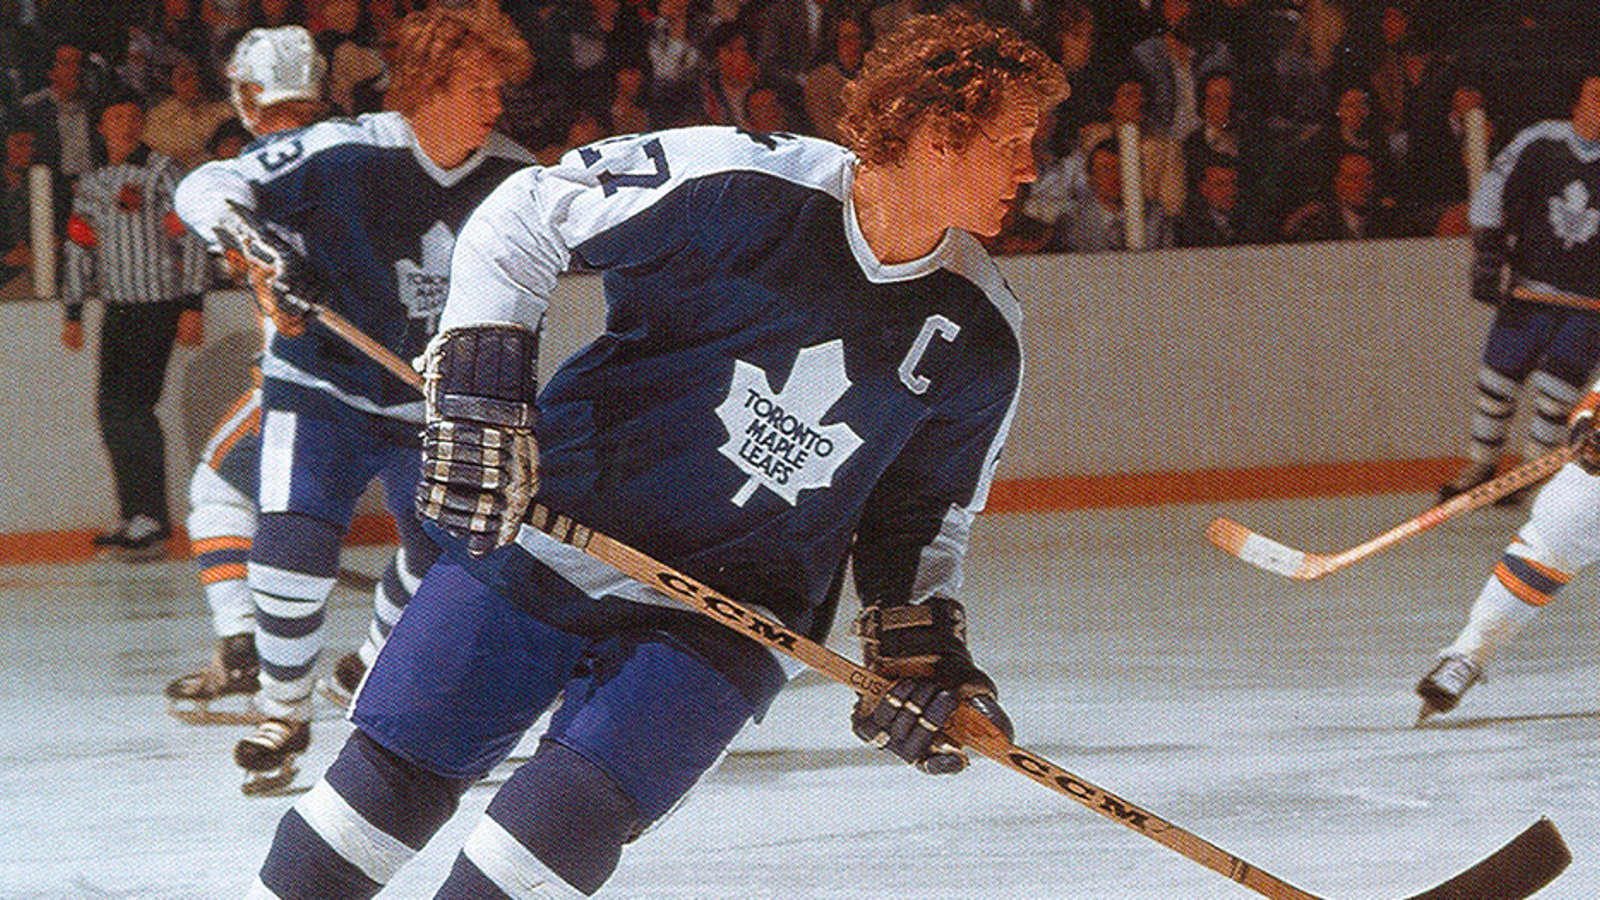 TSN’s all-time Leafs team triggers angry Leafs fans